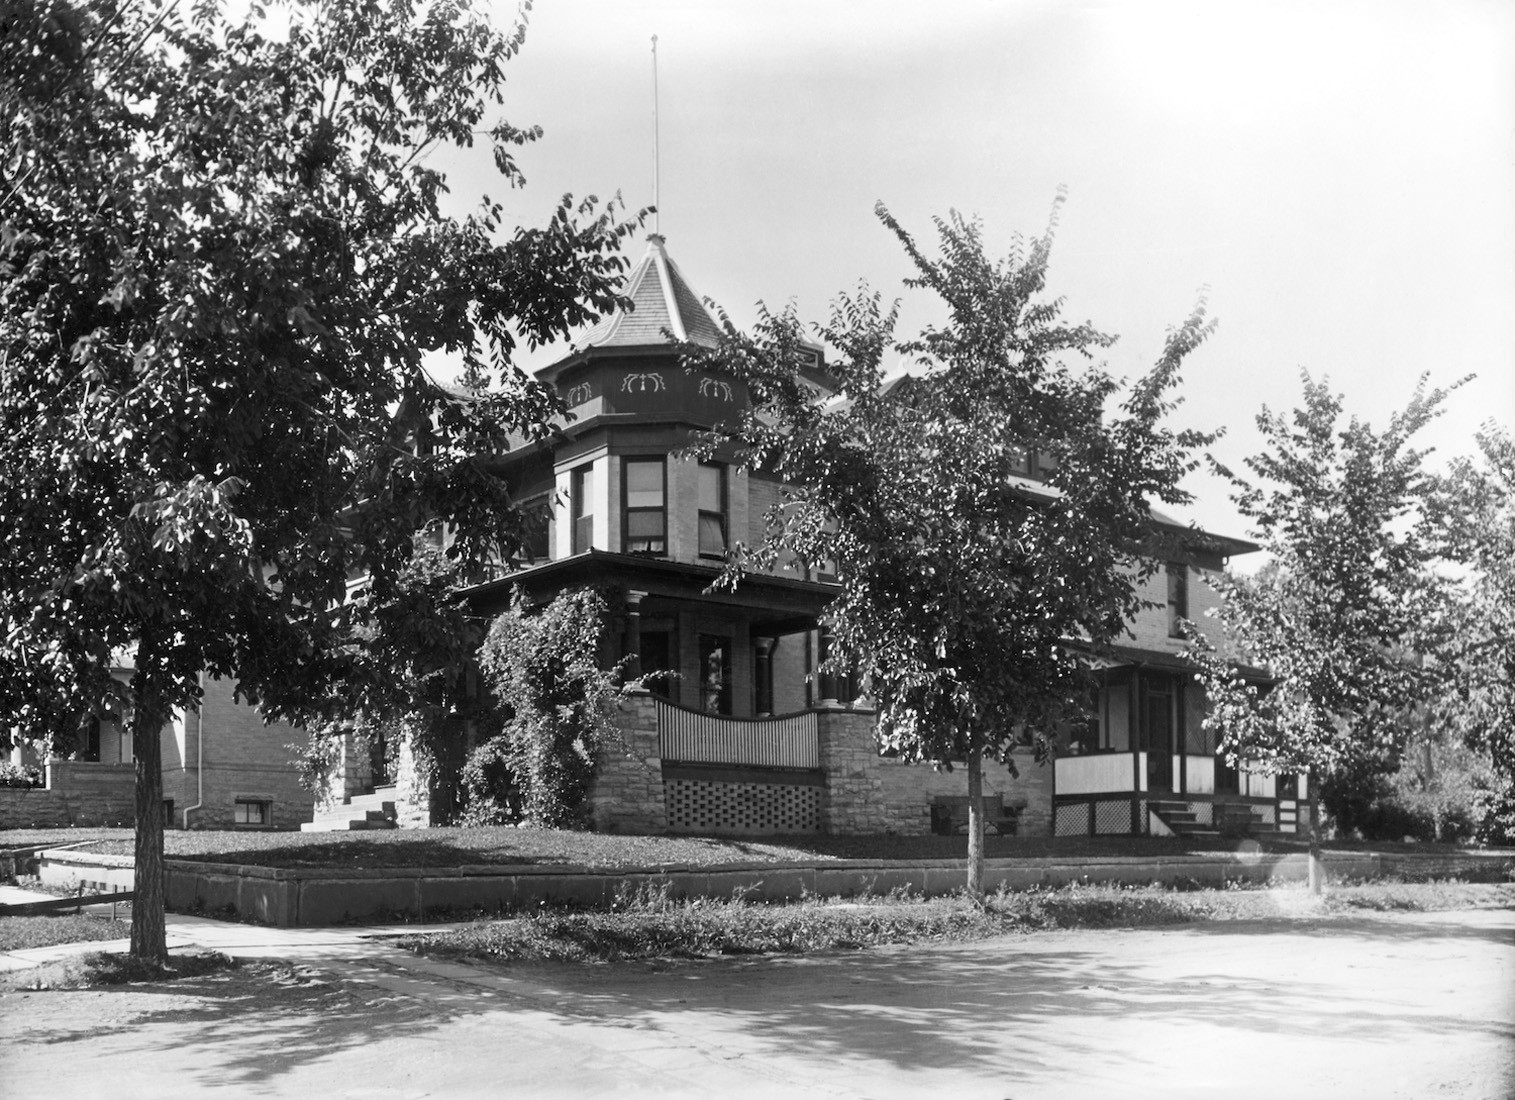 Black and white photo of the original building in 1900s before becoming The Sink